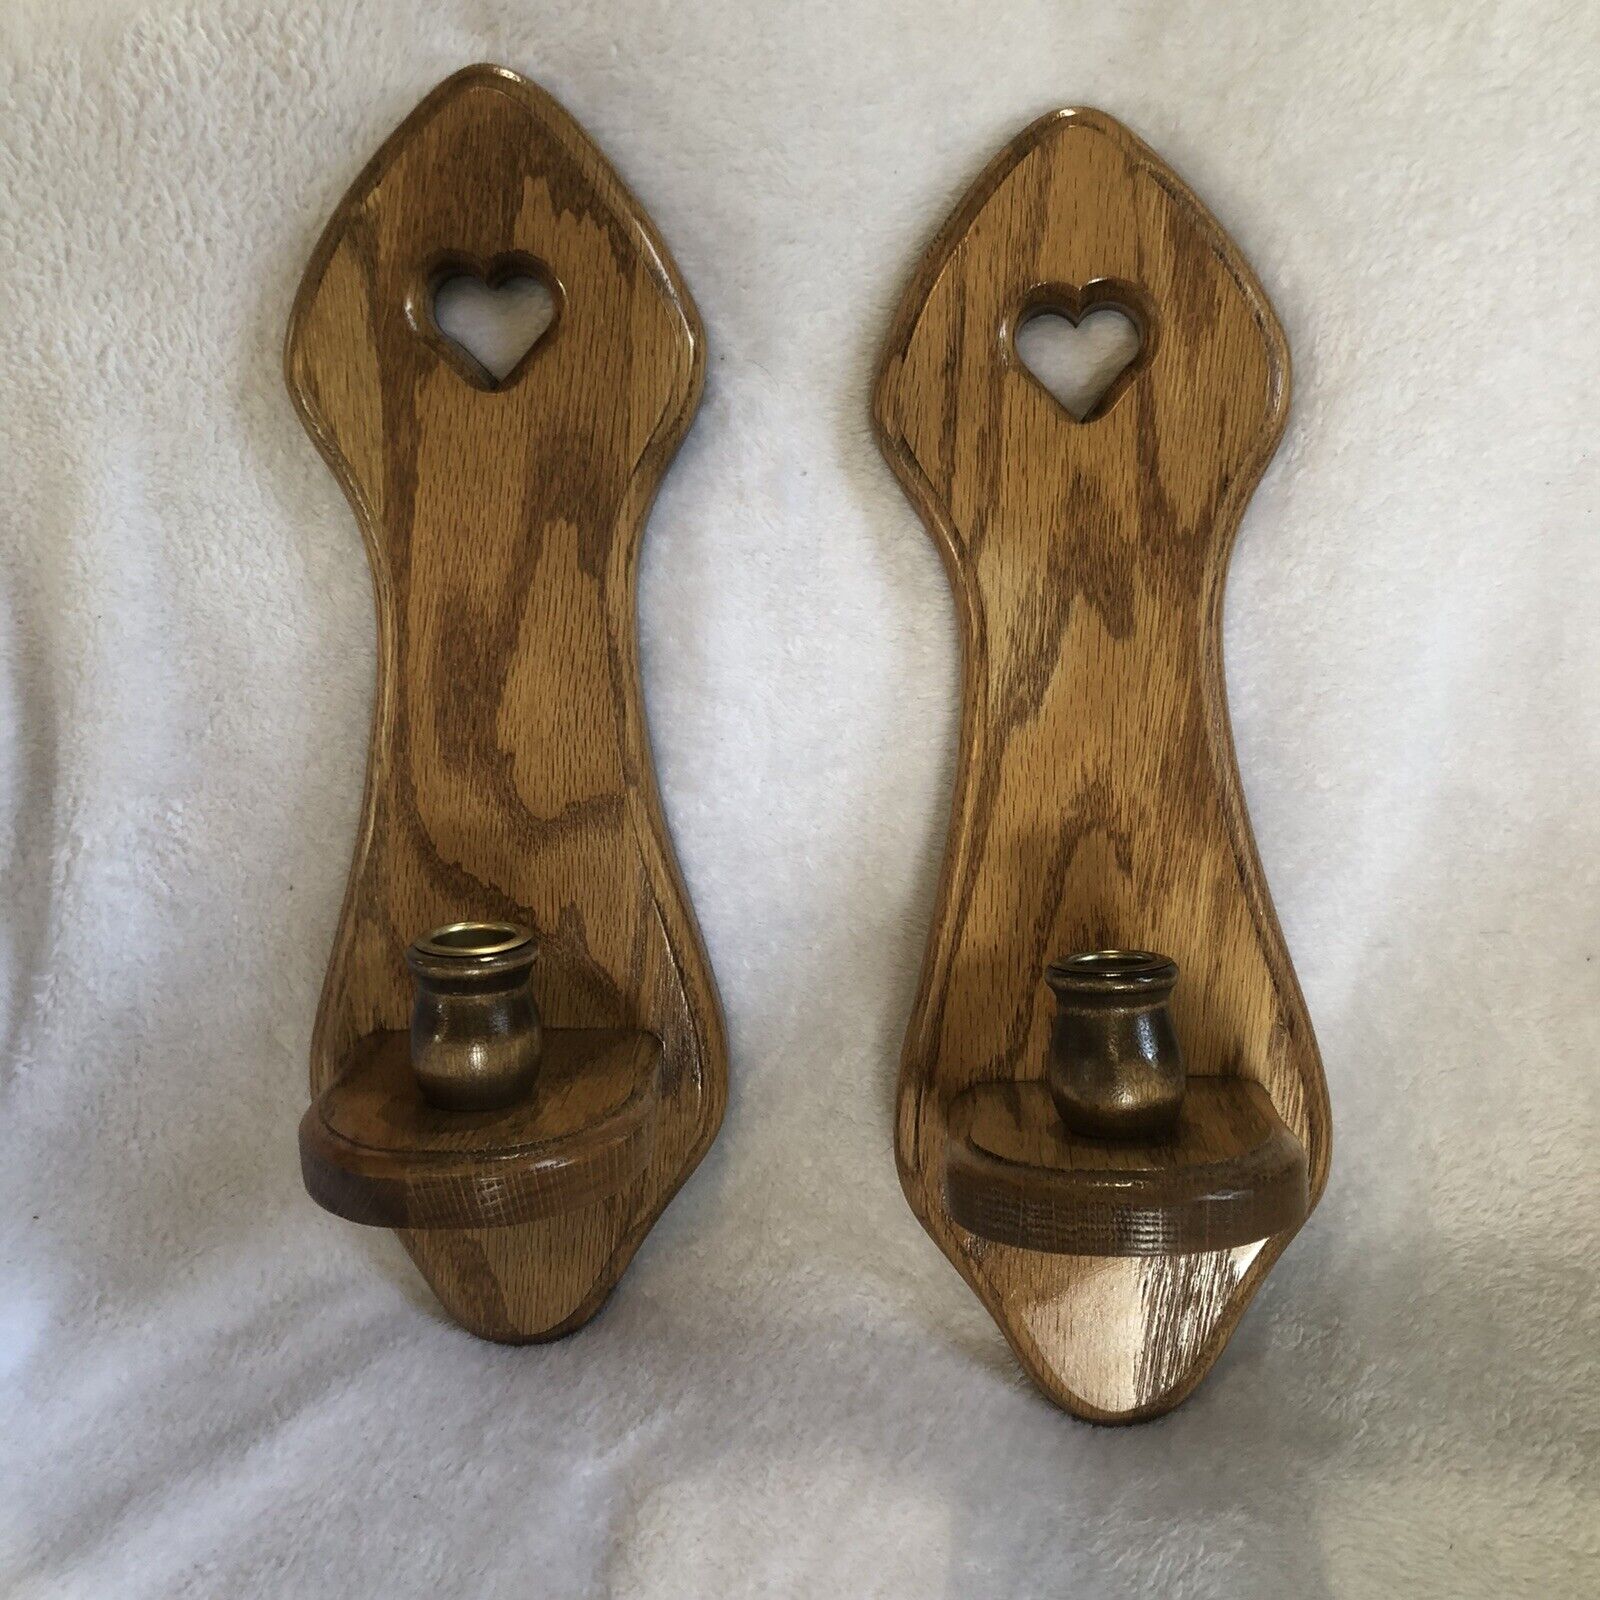 Pair Home Interiors Wooden Heart Candle Sconces 15” Vintage Wall Hanging Decor